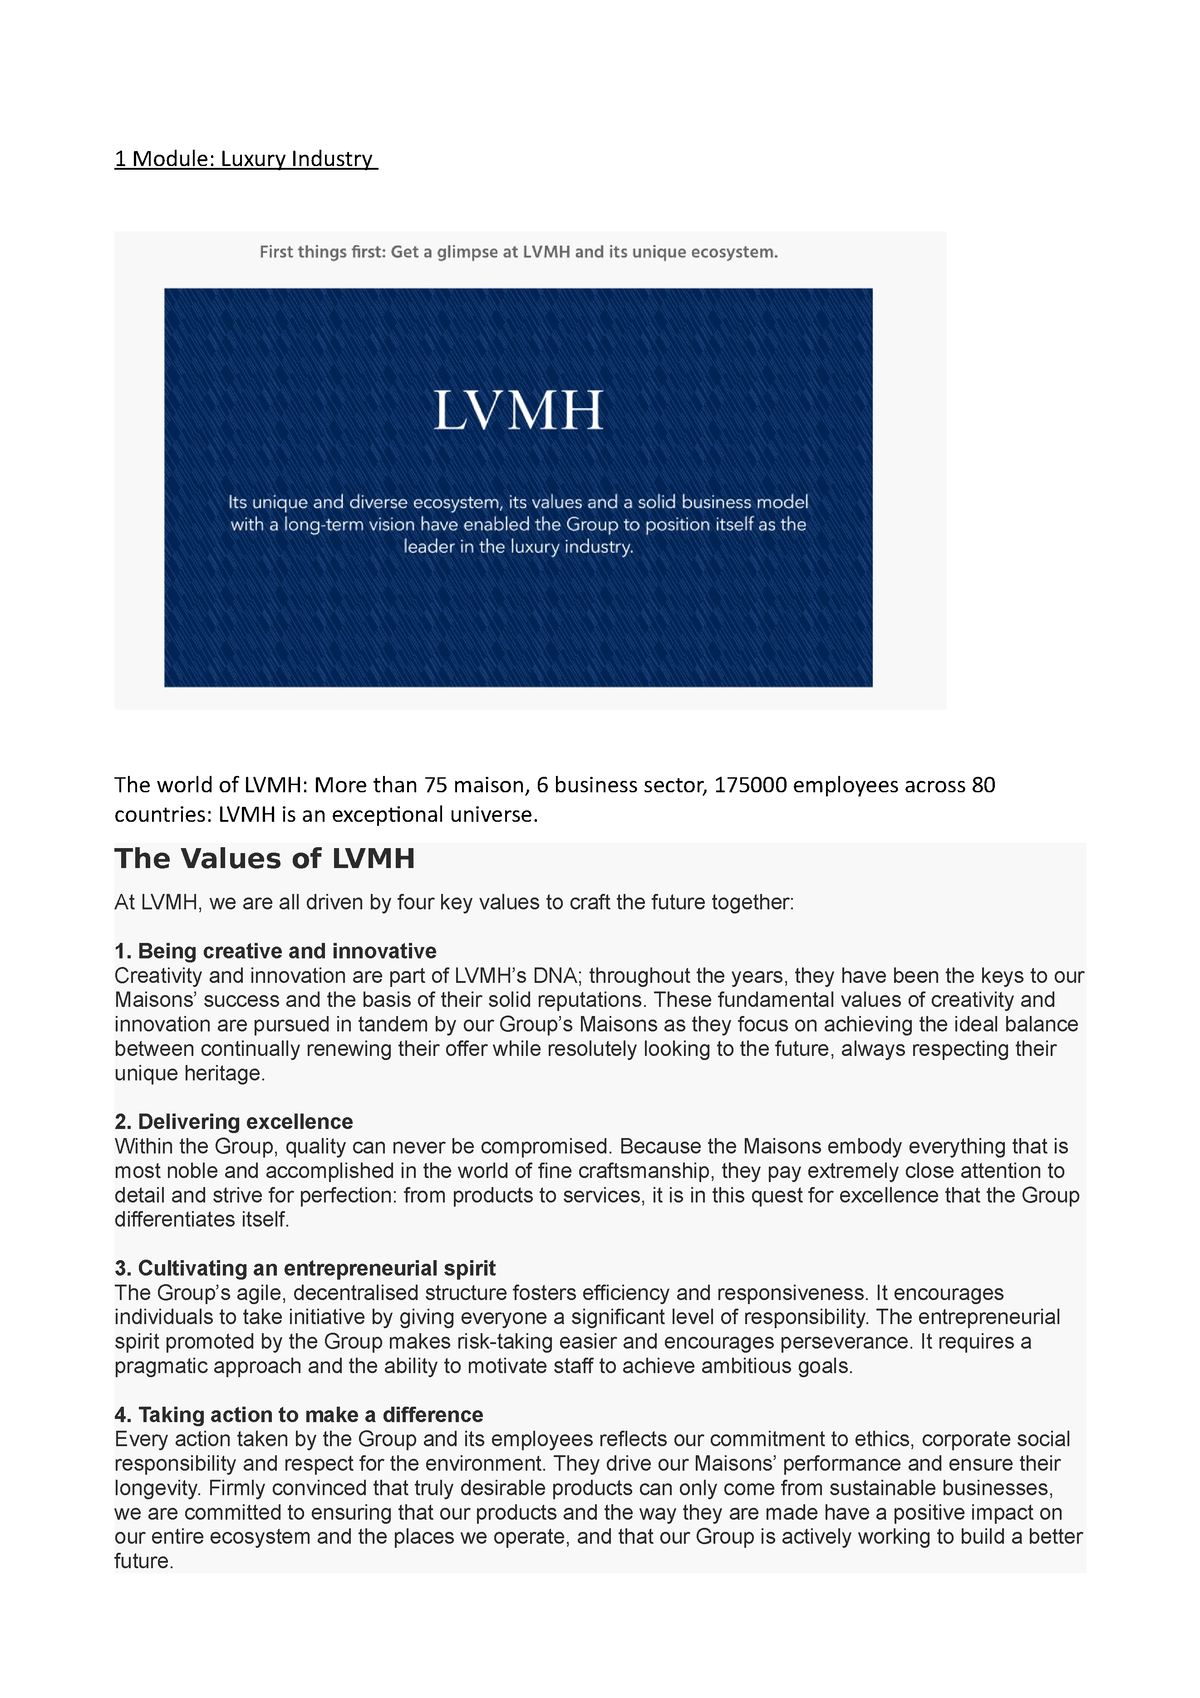 Inside lvmh - module 1 lvmh certificate - module 1 The Values of LVMH At  LVMH, we are all driven by - Studocu